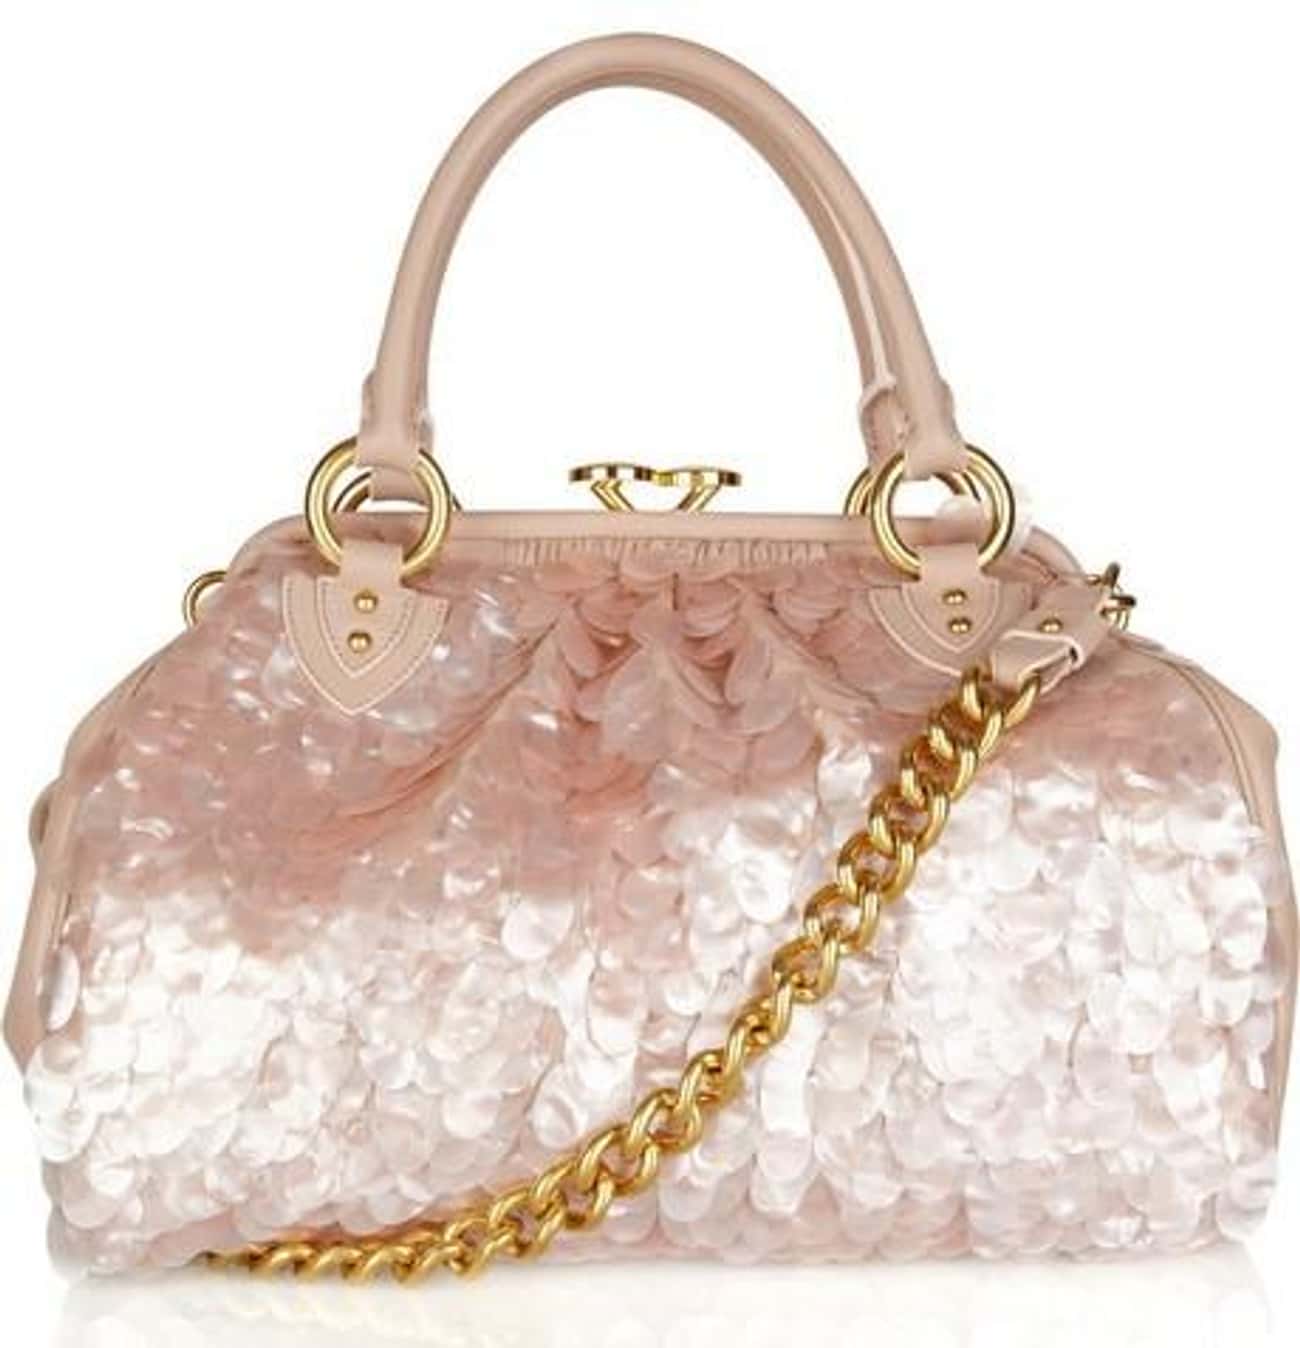 List of 20+ Most Expensive Handbags | Top Purses by Price